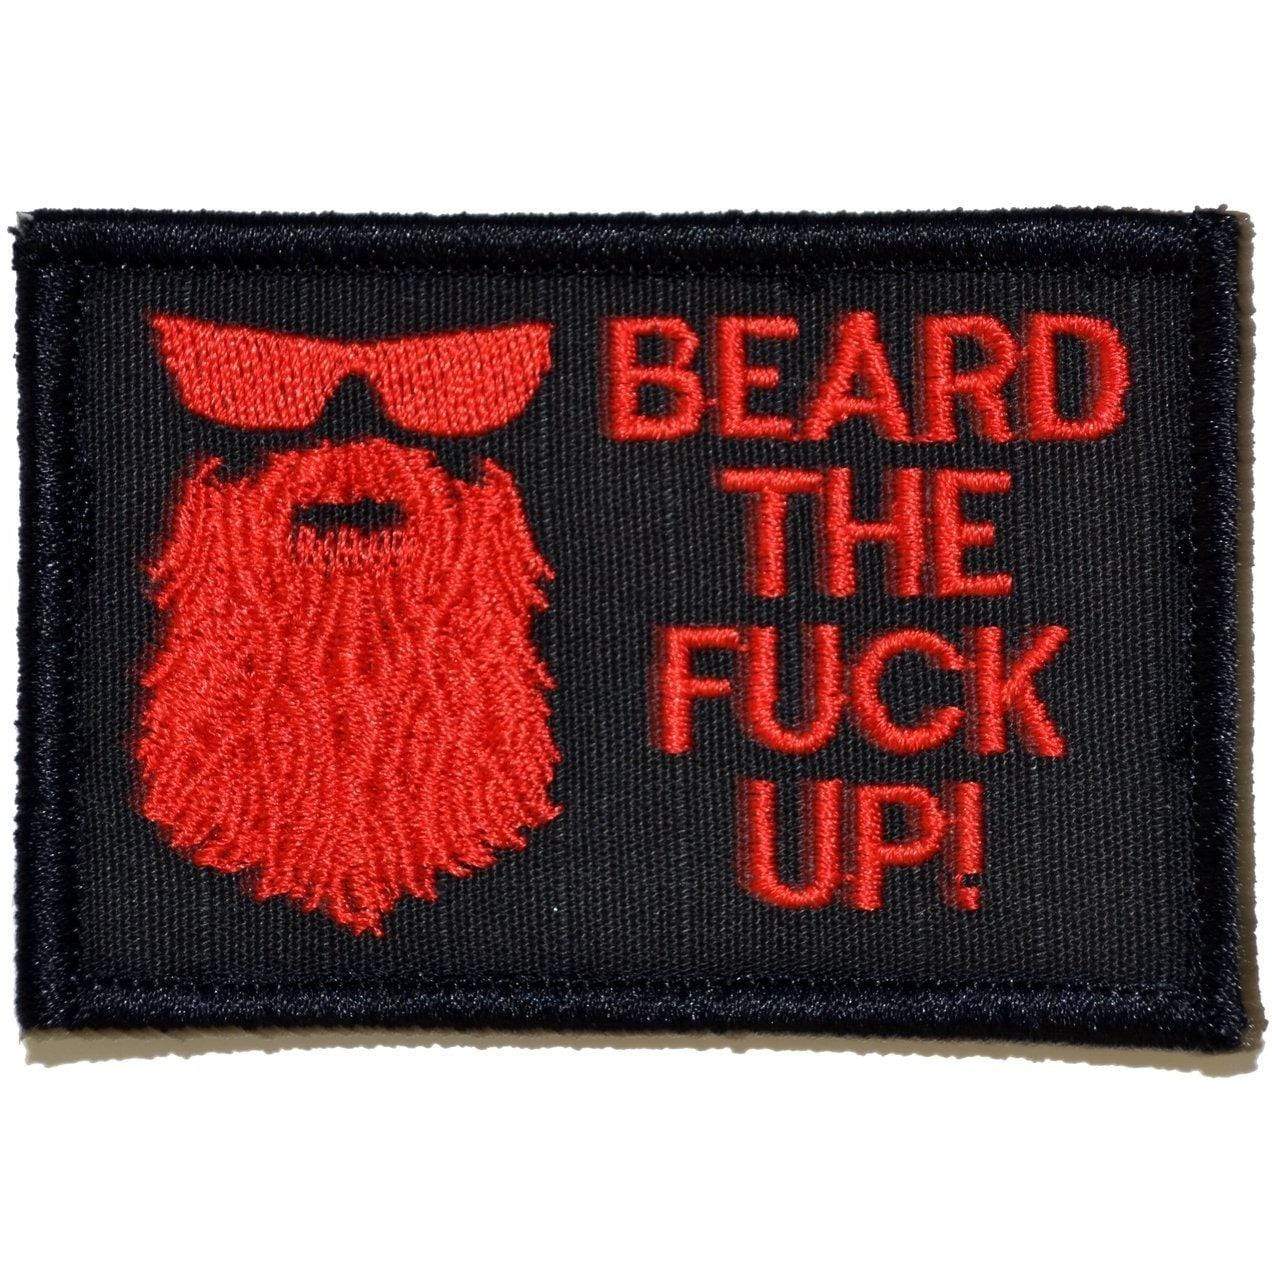 Tactical Gear Junkie Patches Black w/ Red Beard the Fuck Up - 2x3 Patch